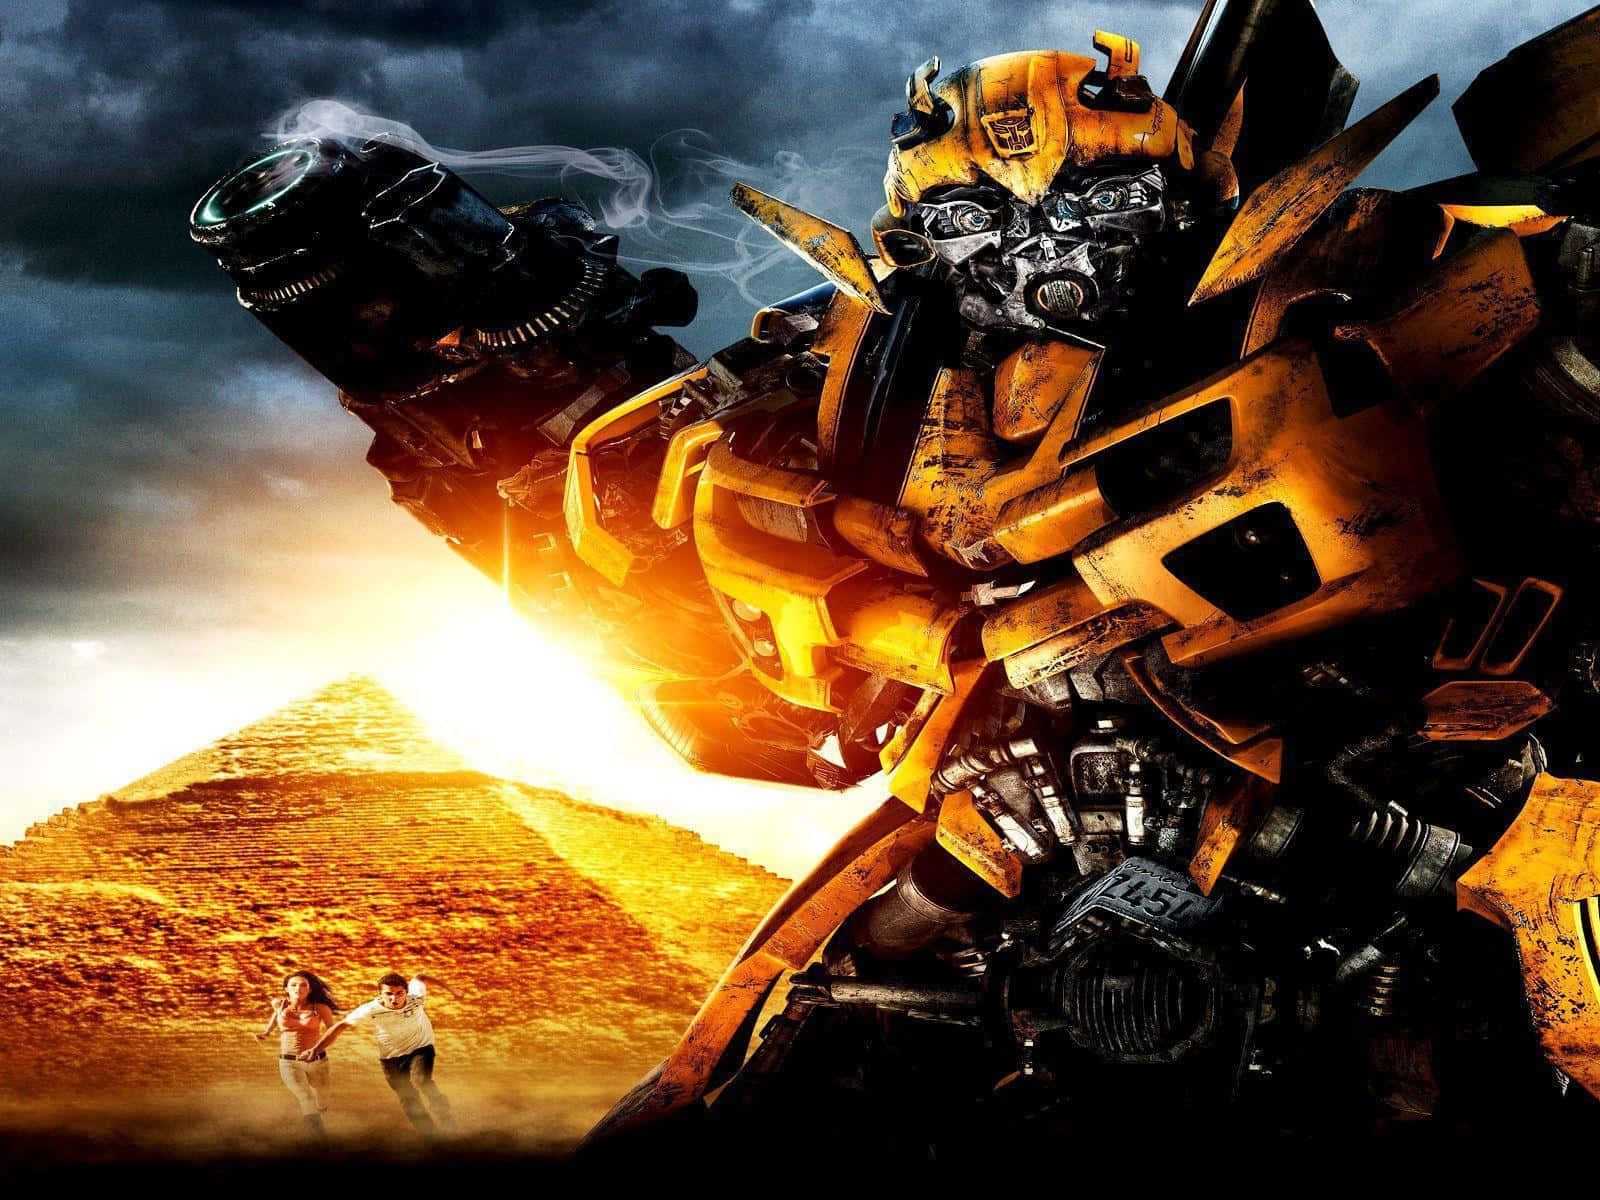 Bumblebee Stares Down The Decepticons - Ready For Action